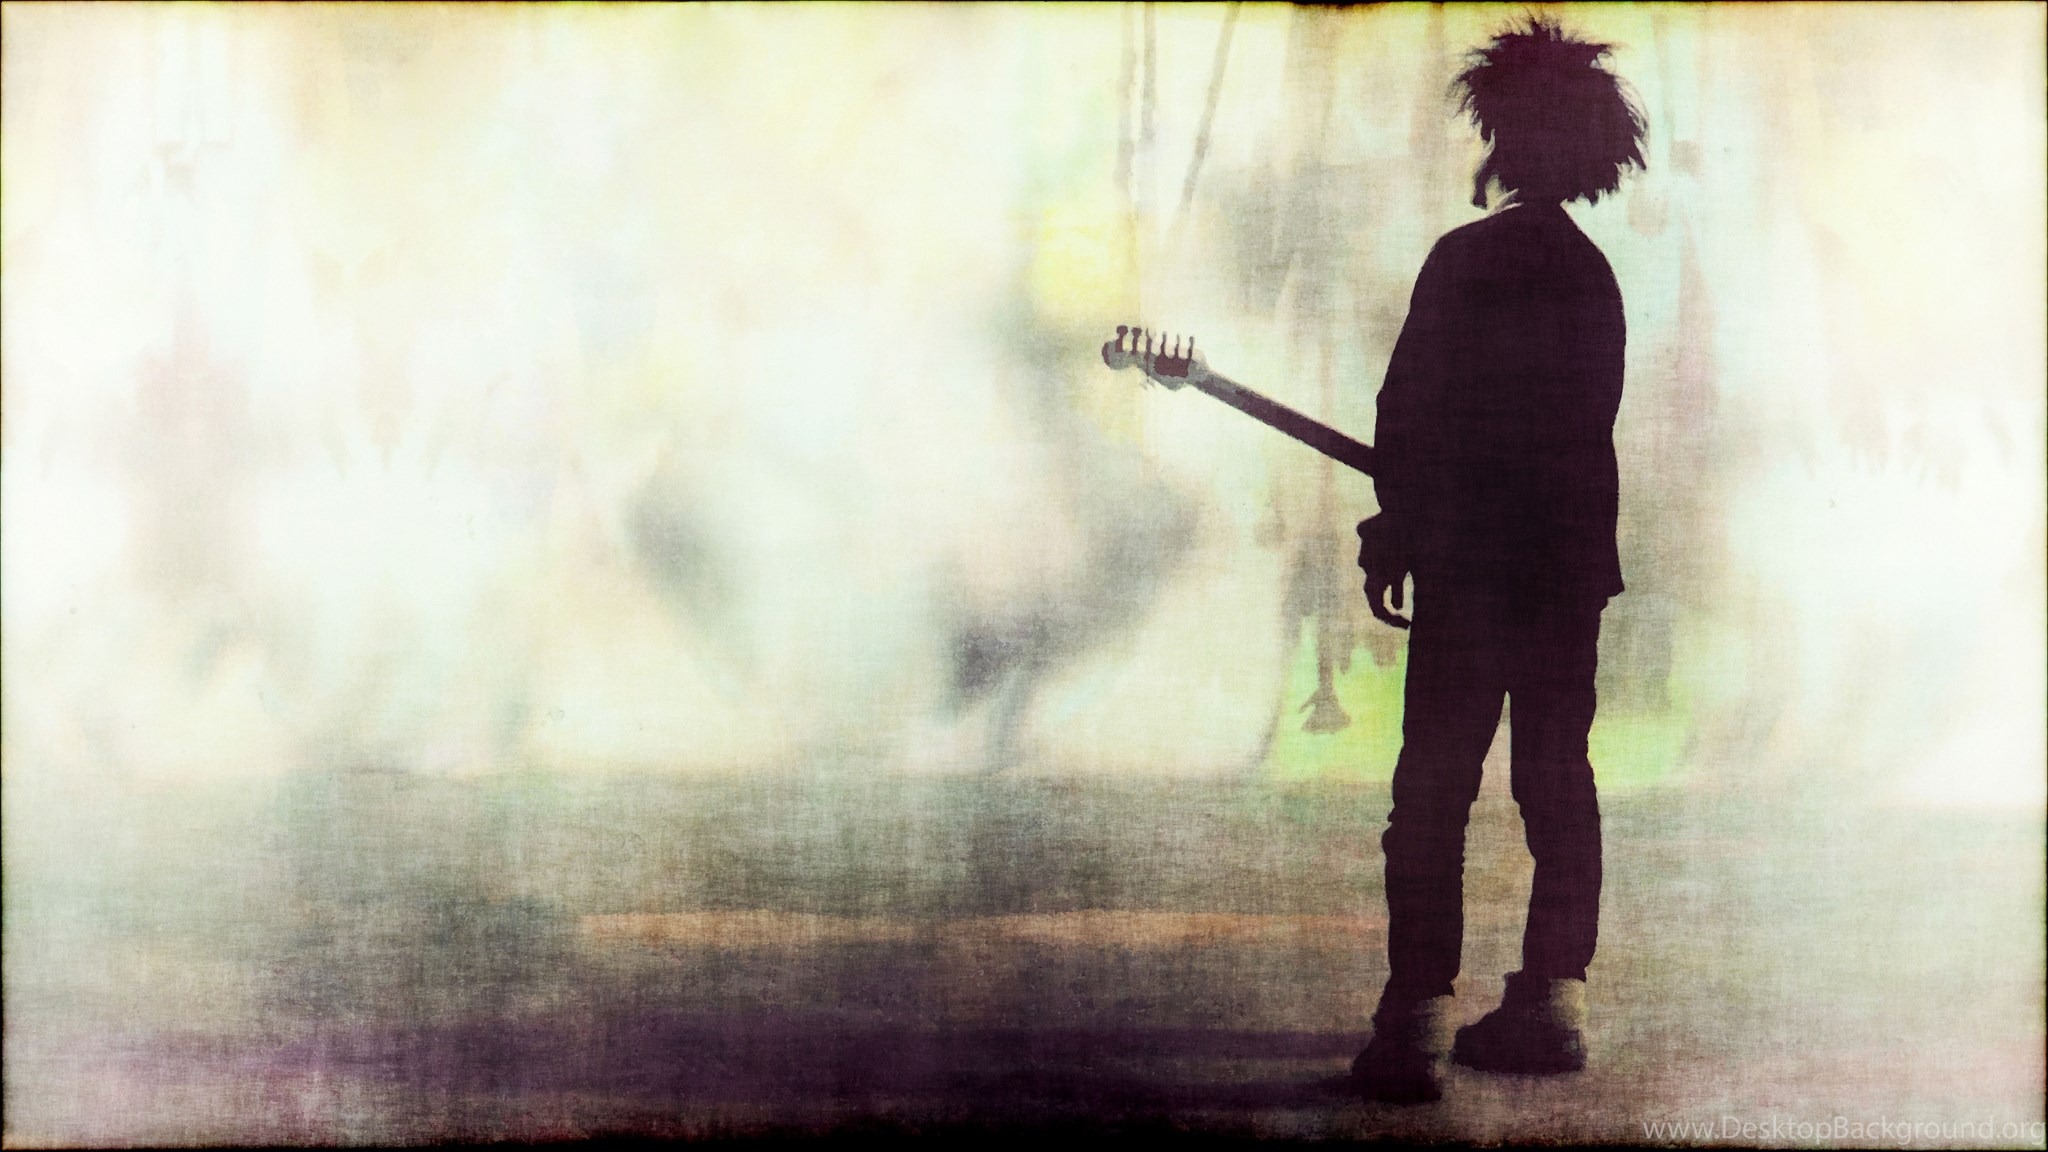 Download Wallpapers (5920 X 3330 Píxeles) HD - 8 / THE CURE - ROBERT SMITH ...